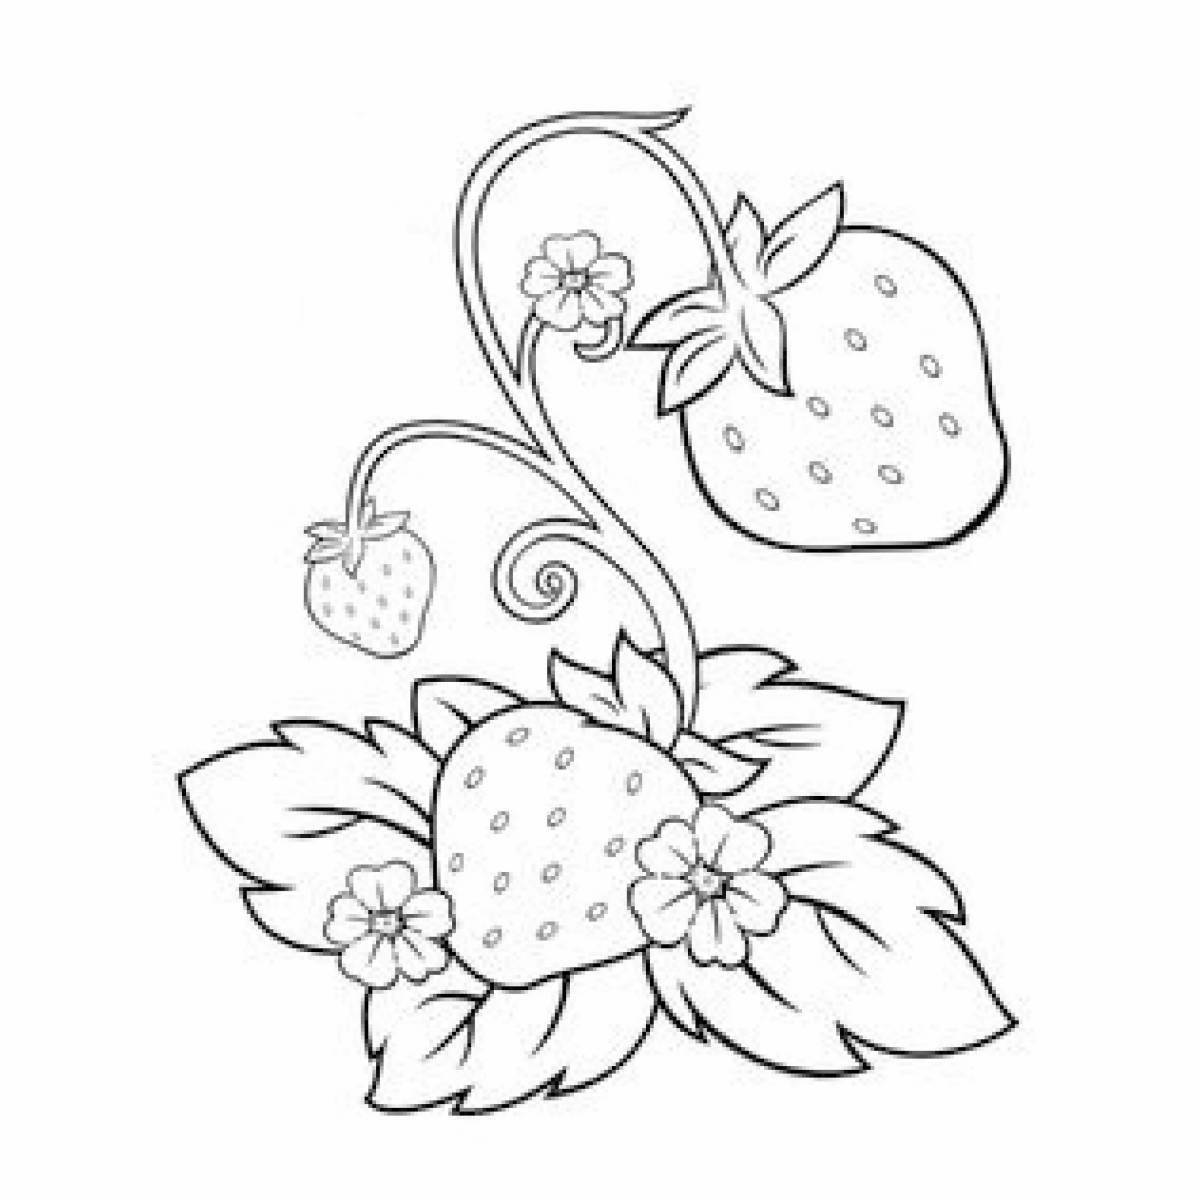 Vivid coloring game with strawberries